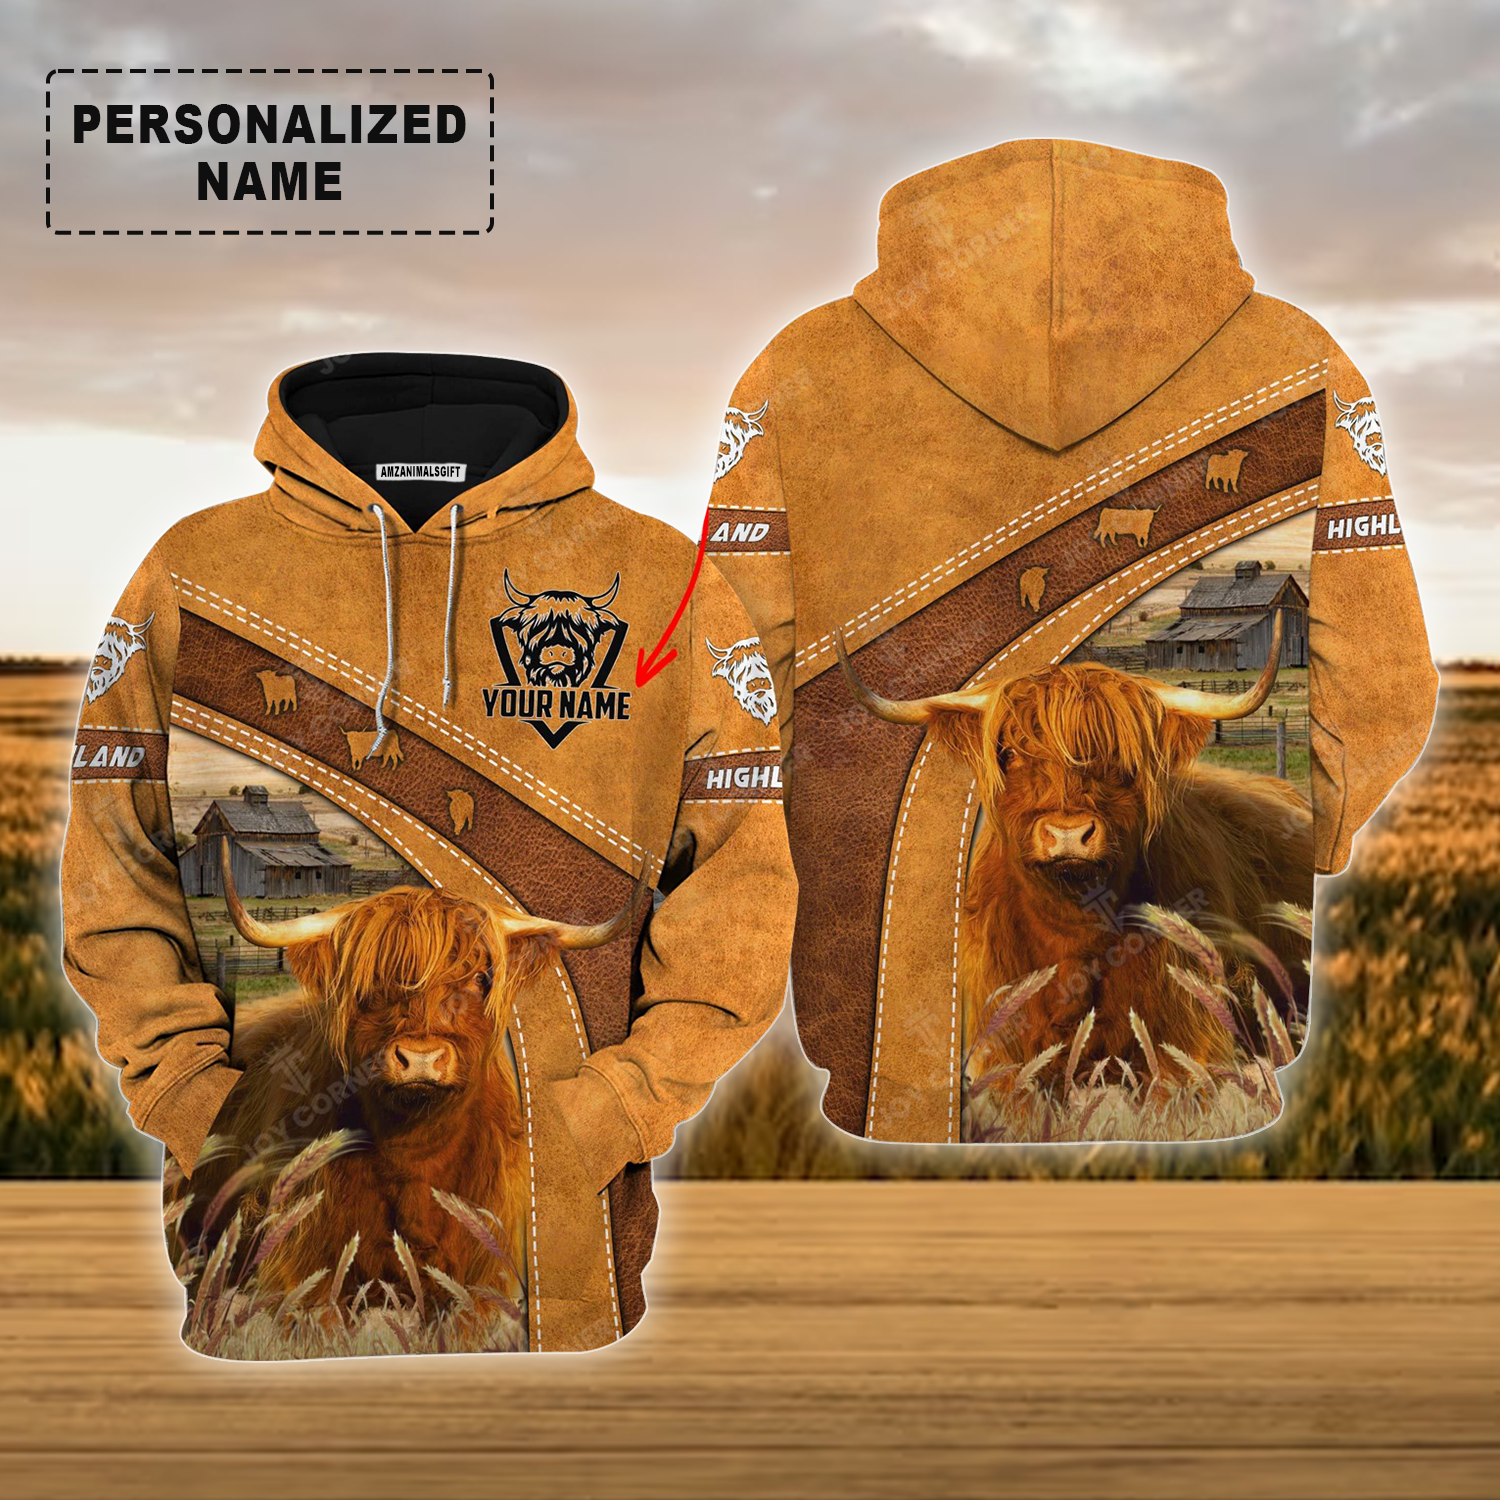 Personalized Highland Cattle Hoodie, Highland Cattle On The Farm Leather Pattern Shirt For Friend, Family, Farmer, Highland Cattle Lovers